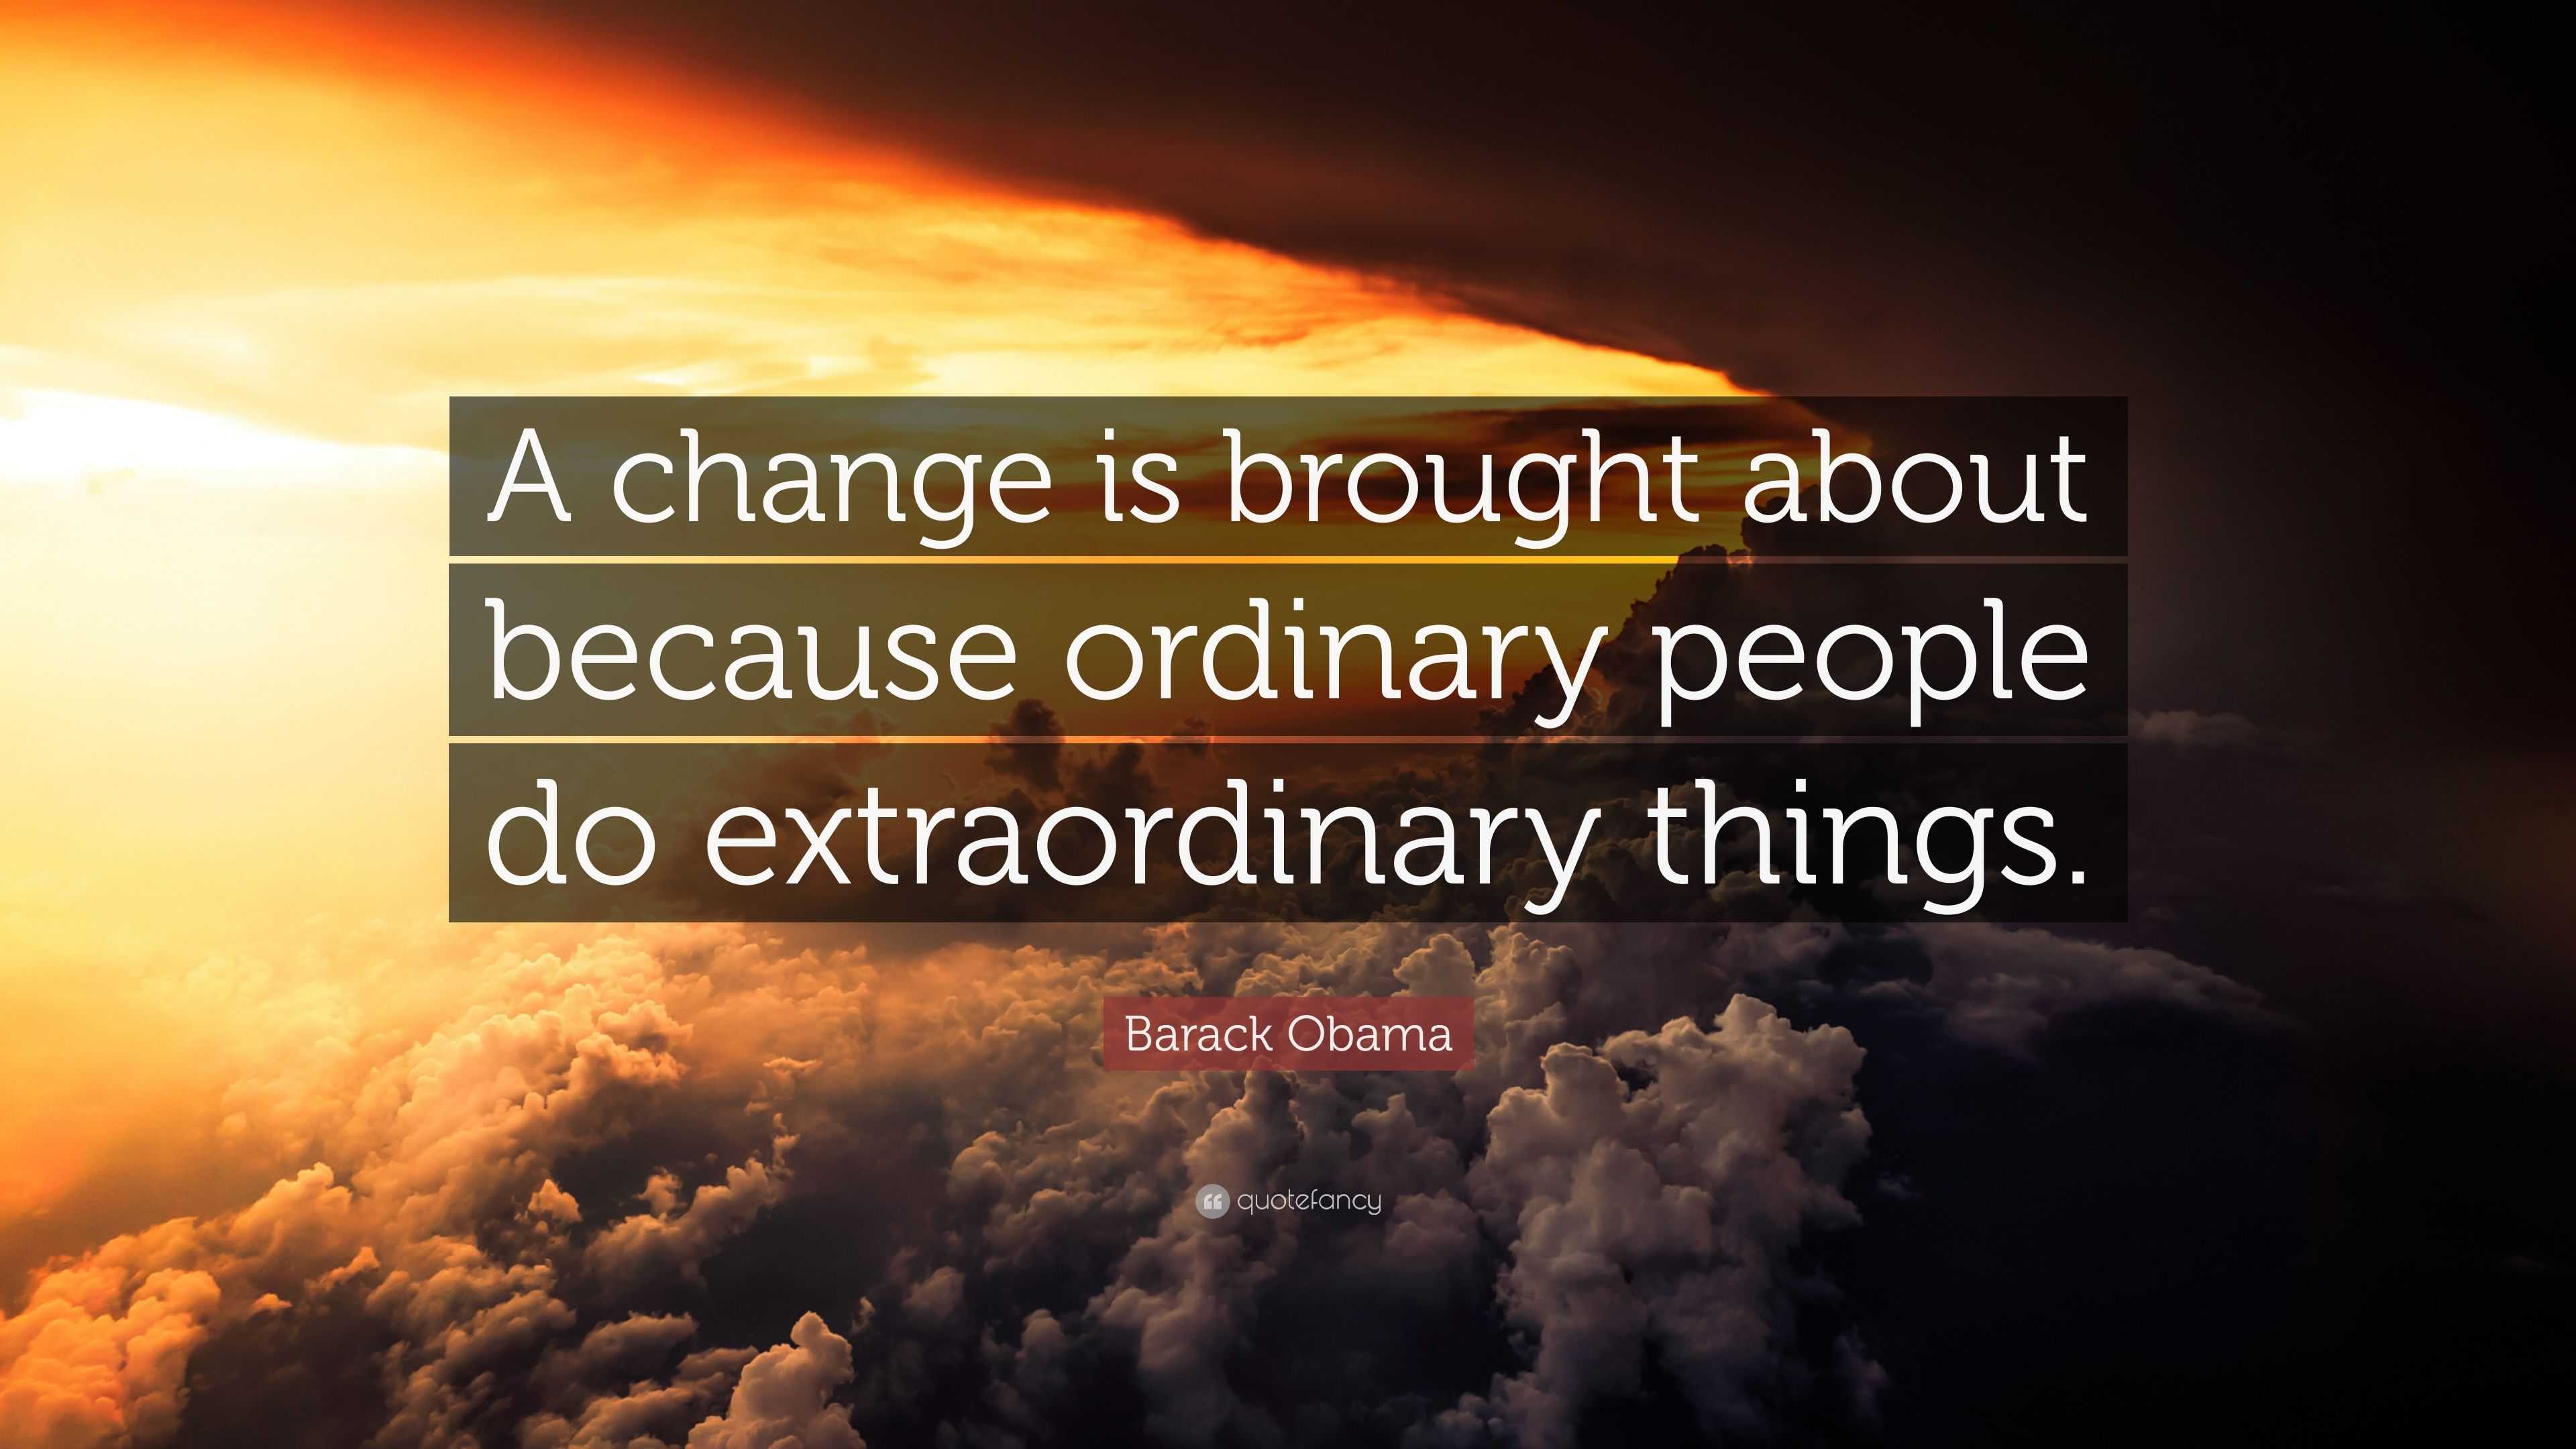 Barack Obama Quote: “A change is brought about because ordinary people